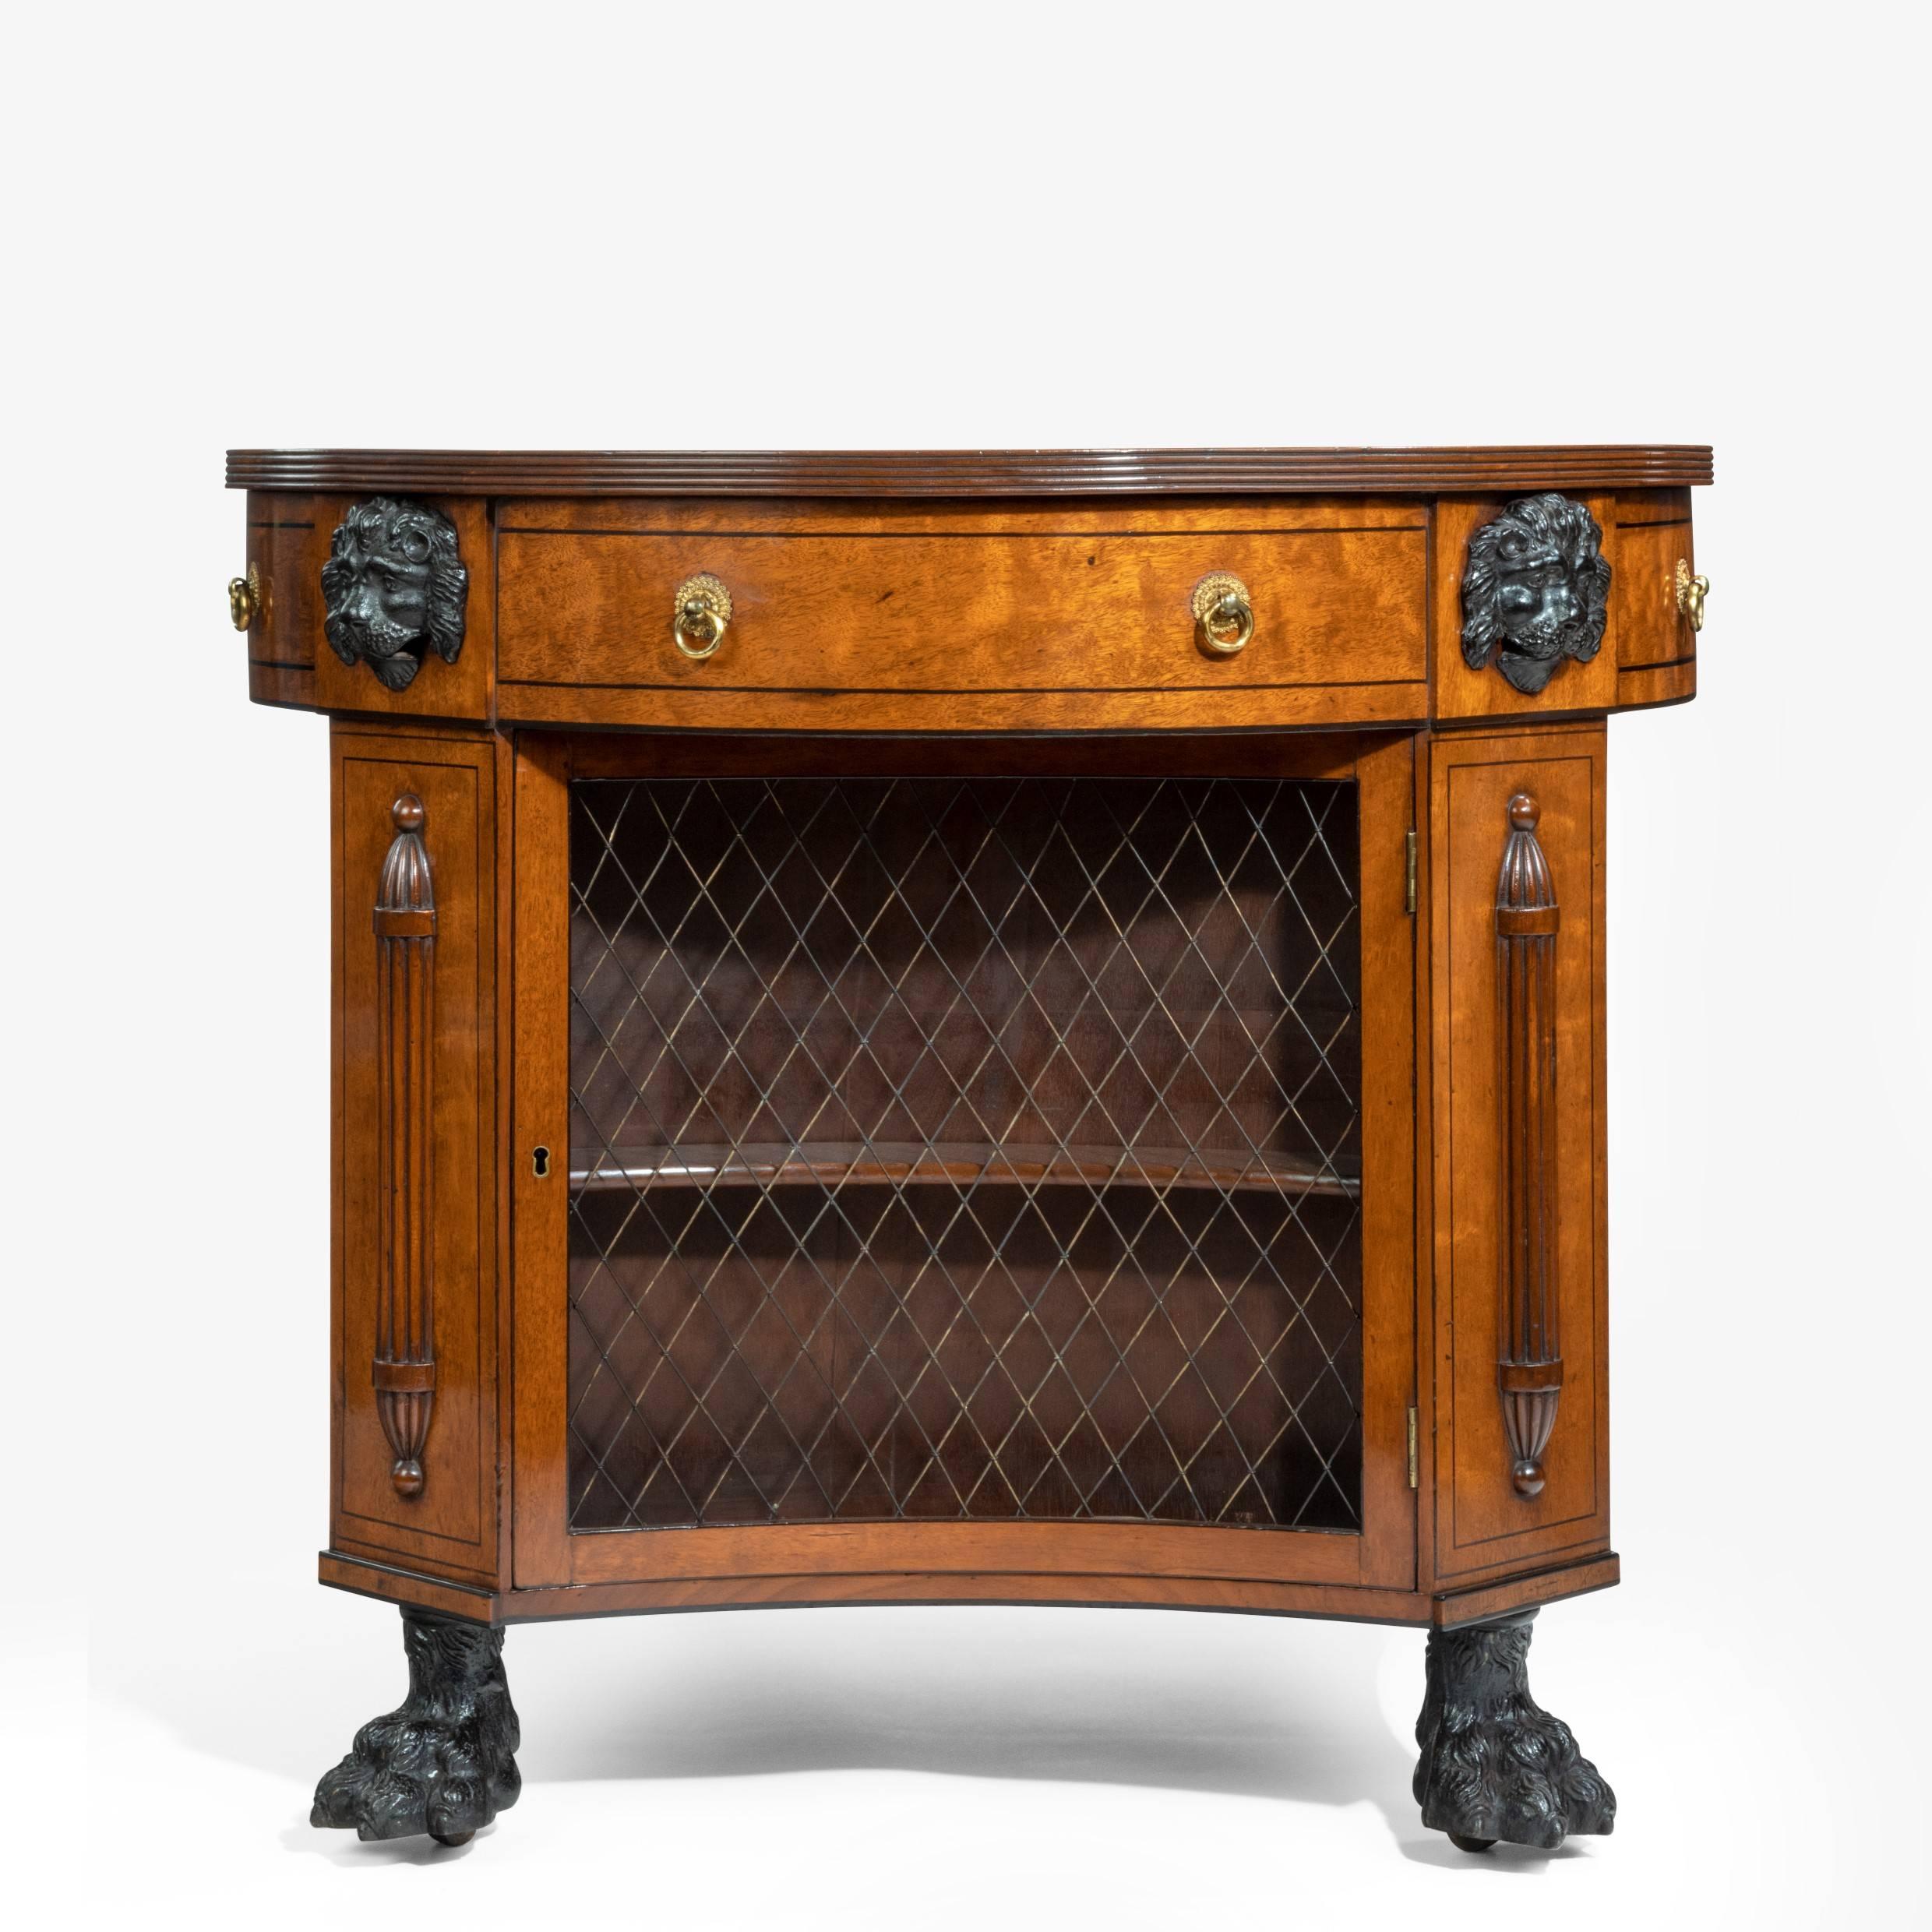 An unusual Regency plum-pudding mahogany library centre table and bookcase,
the circular top with four dummy frieze drawers with ring handles set above four shallow, concave bookcases enclosed behind the original trellis of brass wire, the uprights